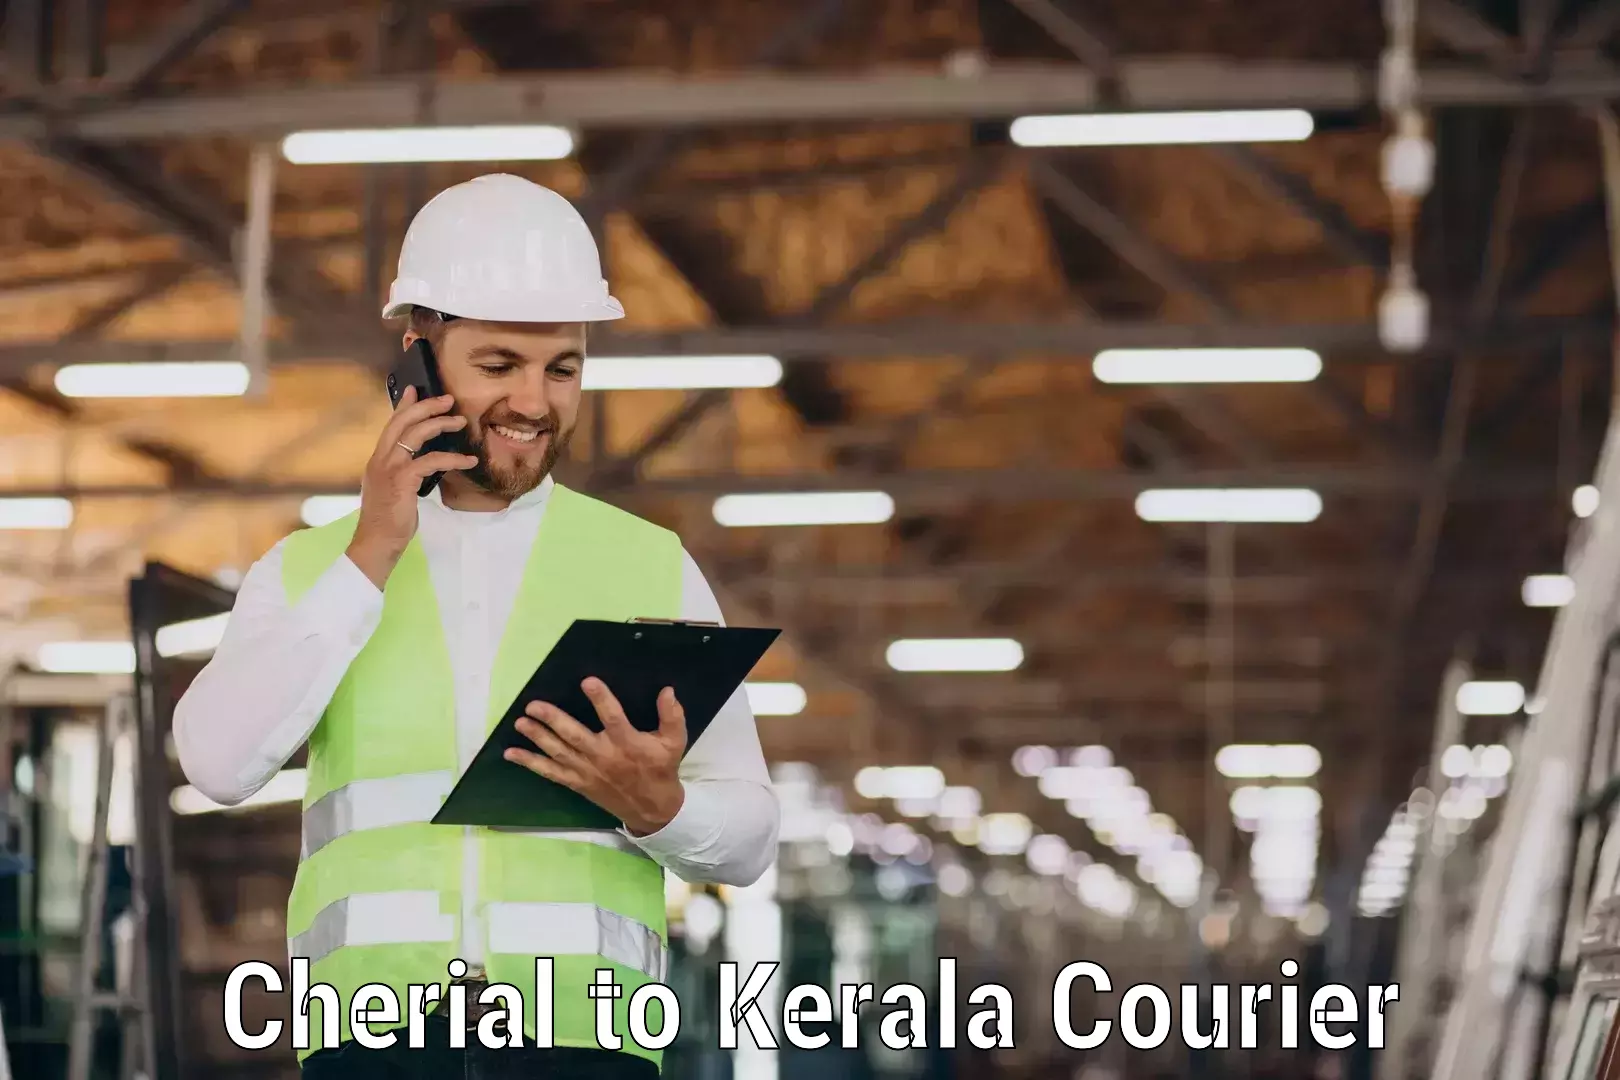 Nationwide courier service Cherial to Cochin University of Science and Technology